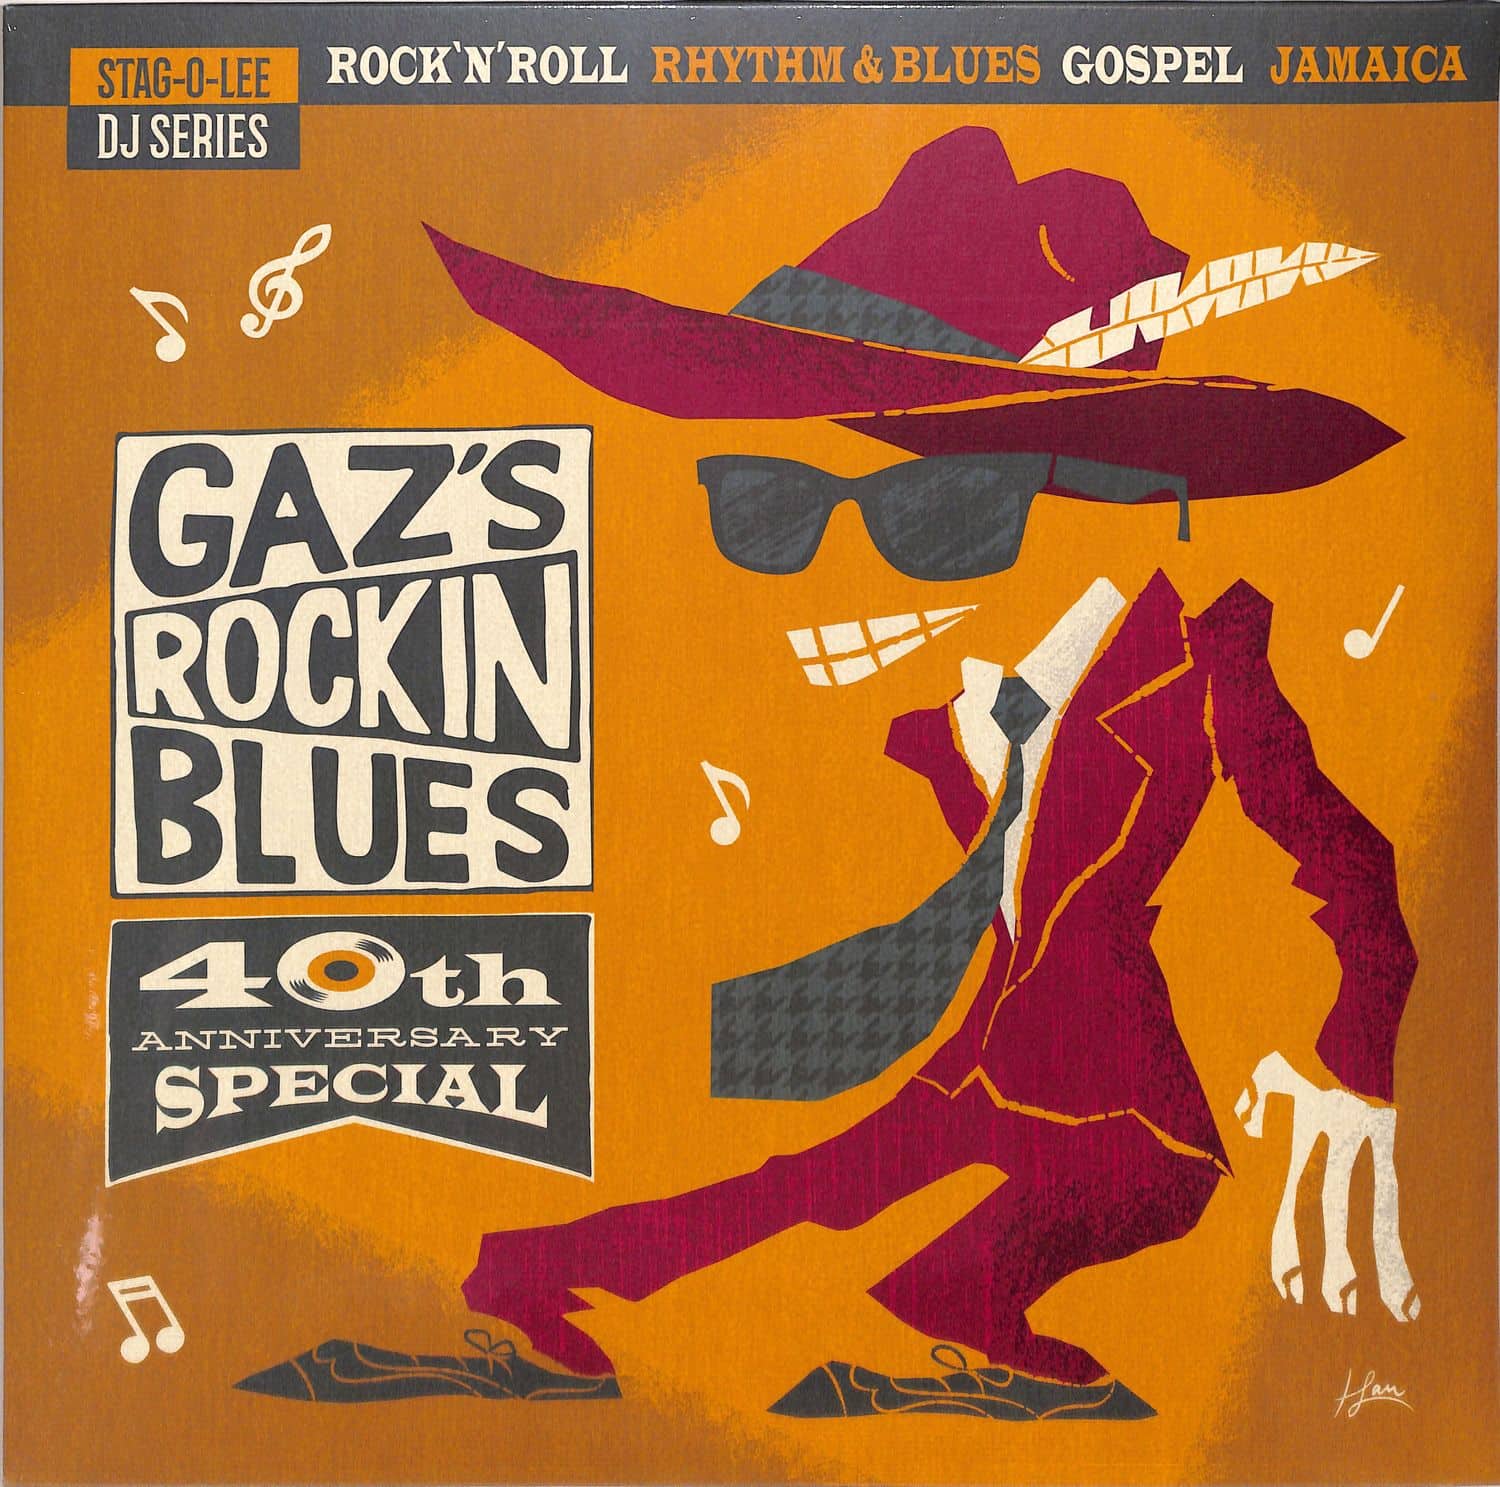 Various Artists - GAZS ROCKIN BLUES - 40TH ANNIVERSARY SPECIAL 